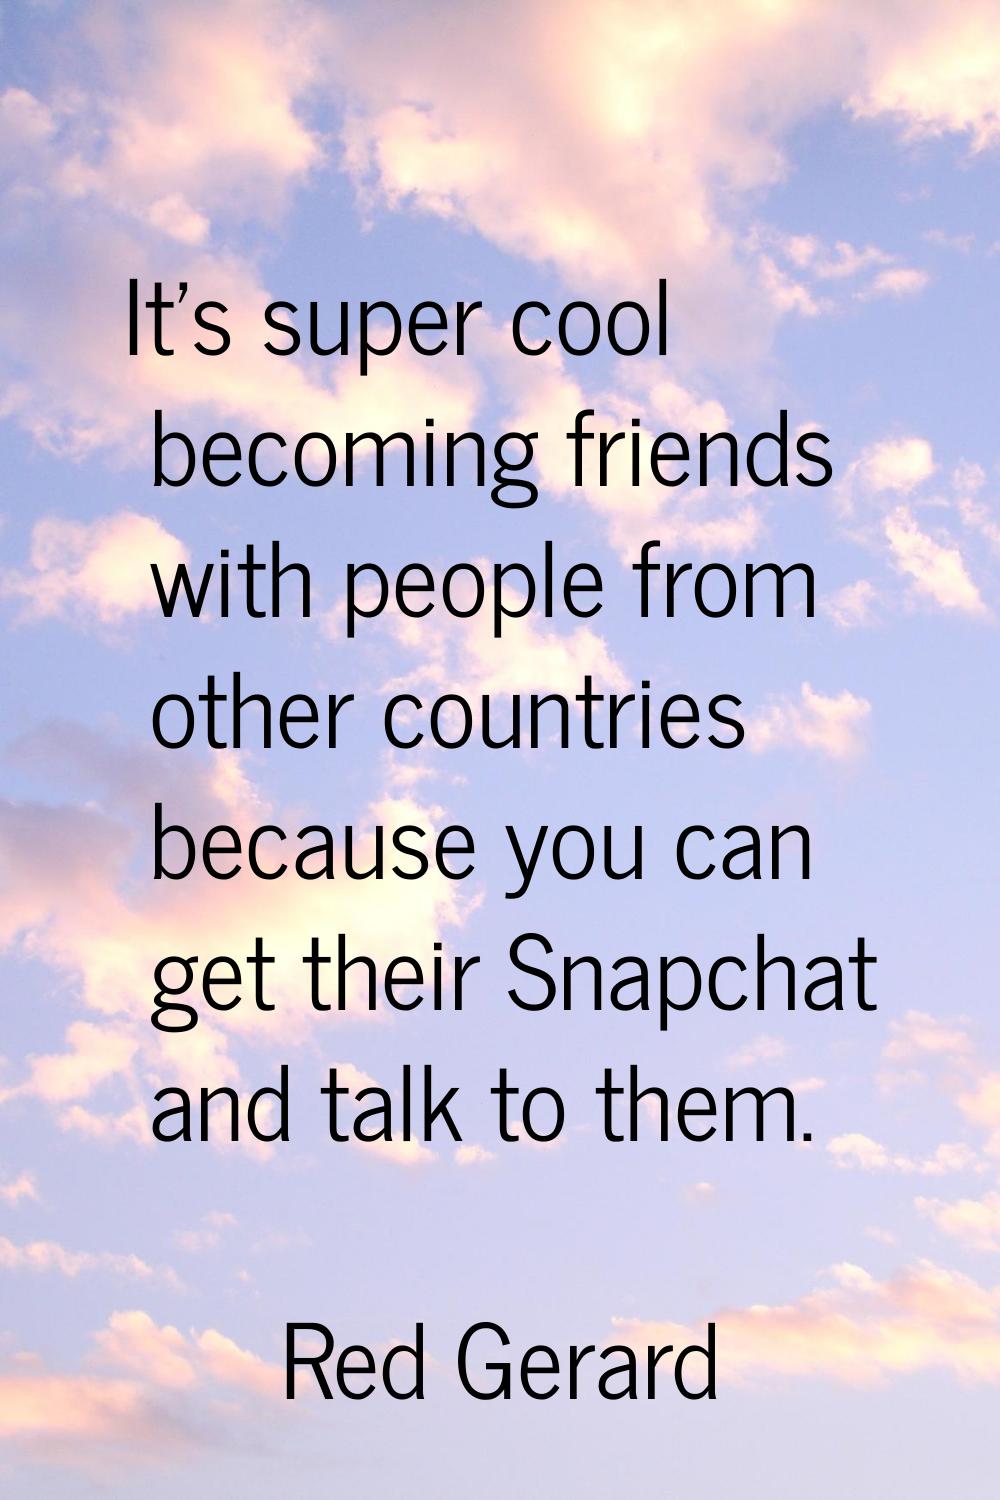 It's super cool becoming friends with people from other countries because you can get their Snapcha